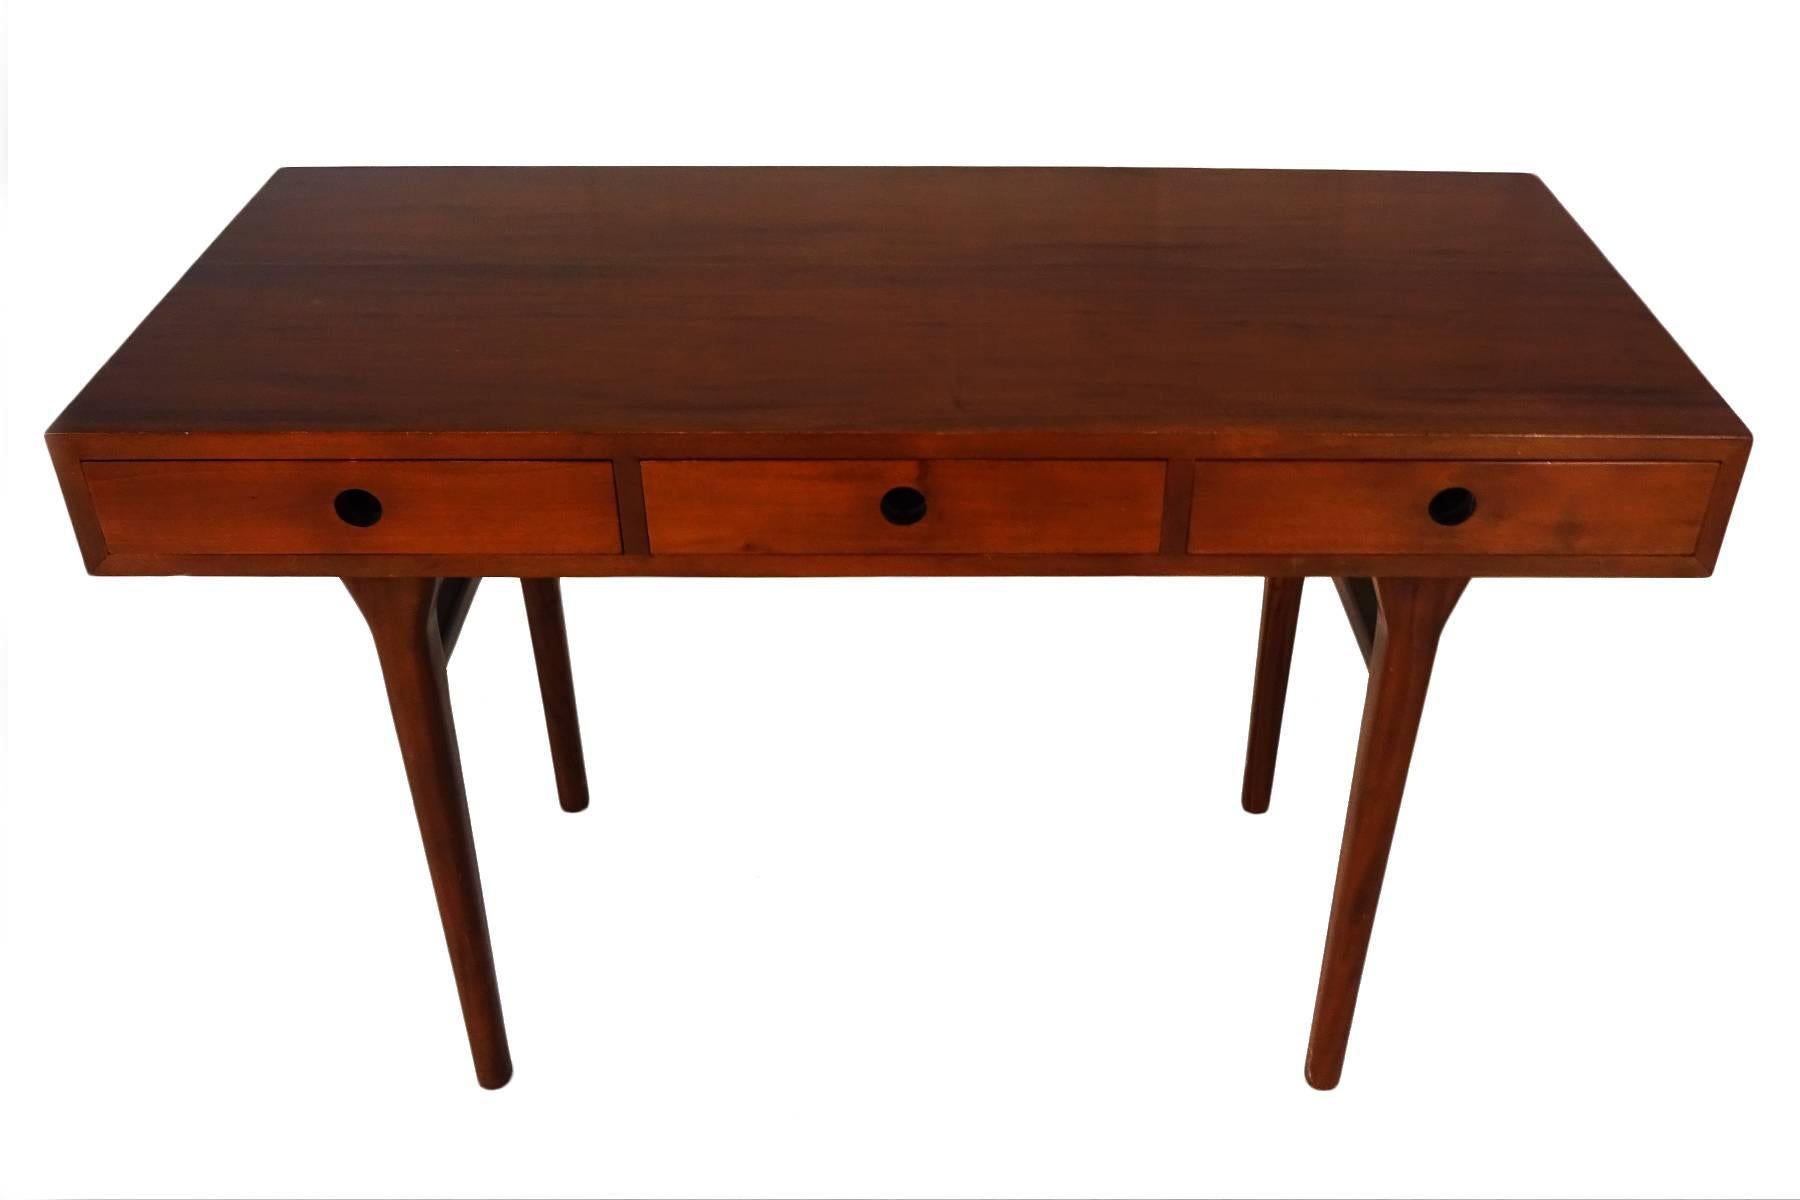 Best known for his ‘Smile’ table Anderson was an accomplished cabinet maker who produced numerous designs including seating, tables and storage from his own workshop and for other furniture manufacturers from the 1930s up until the mid-980s when he